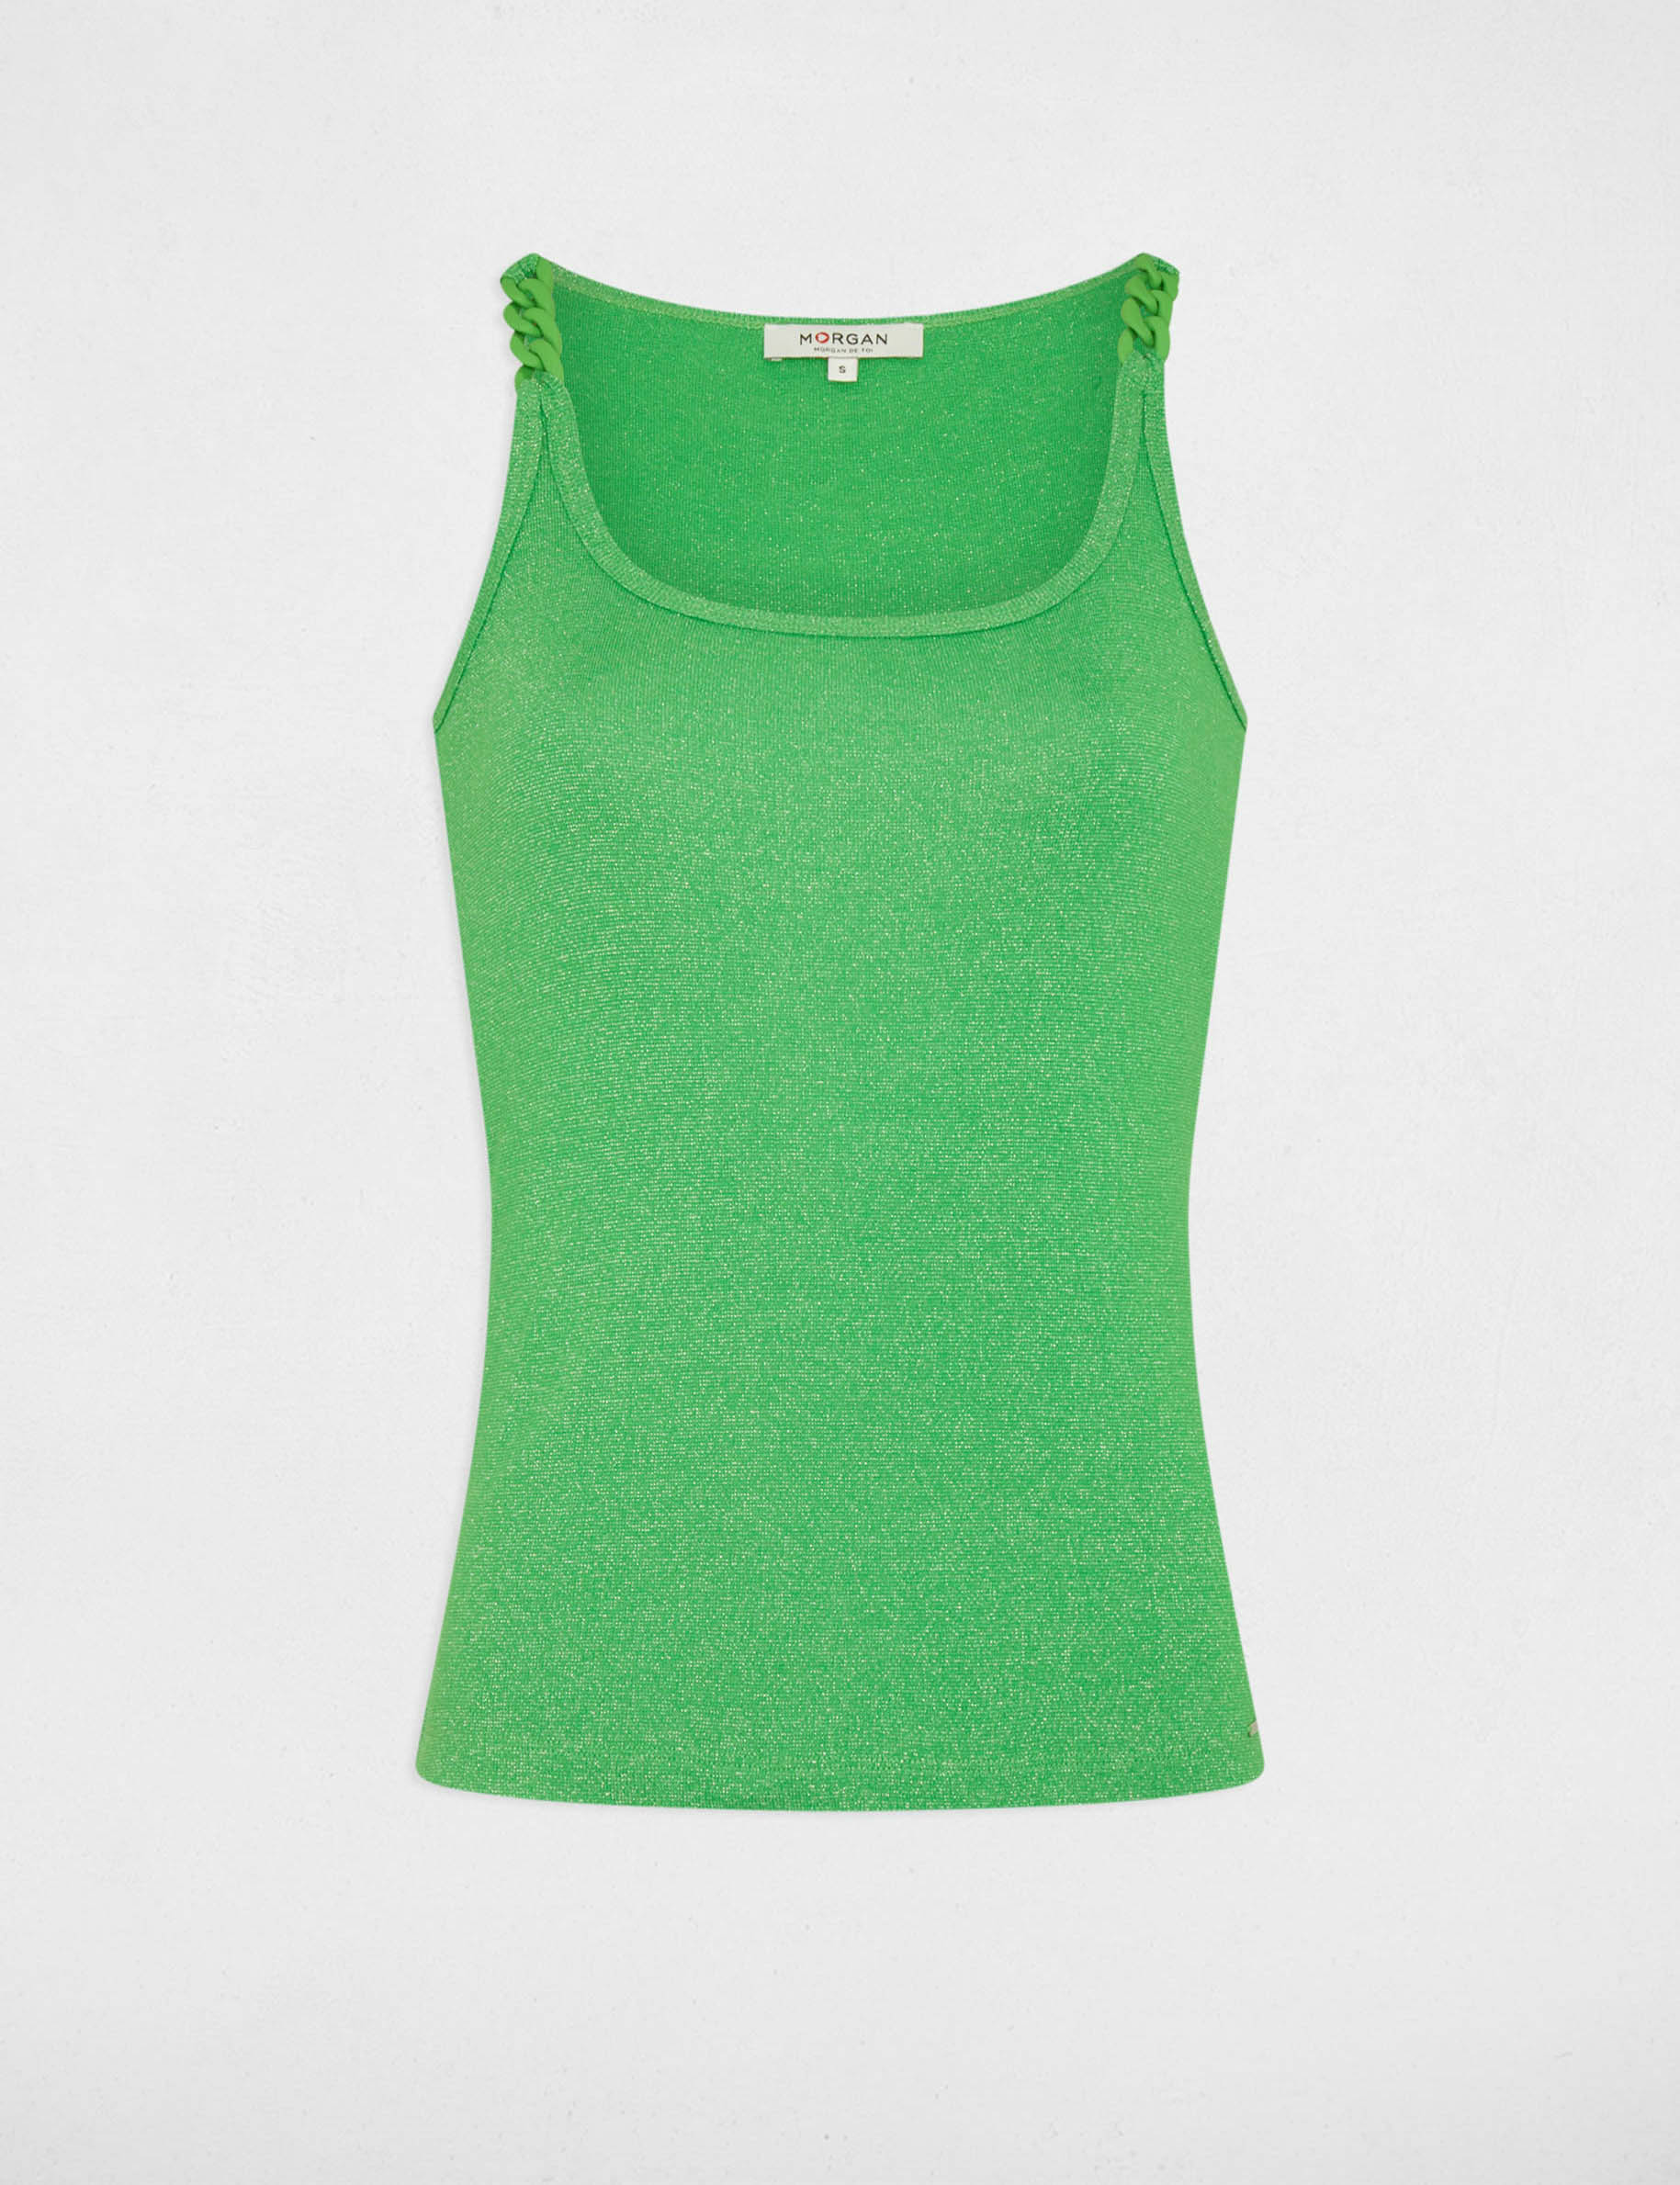 Vest top with thin straps green ladies'